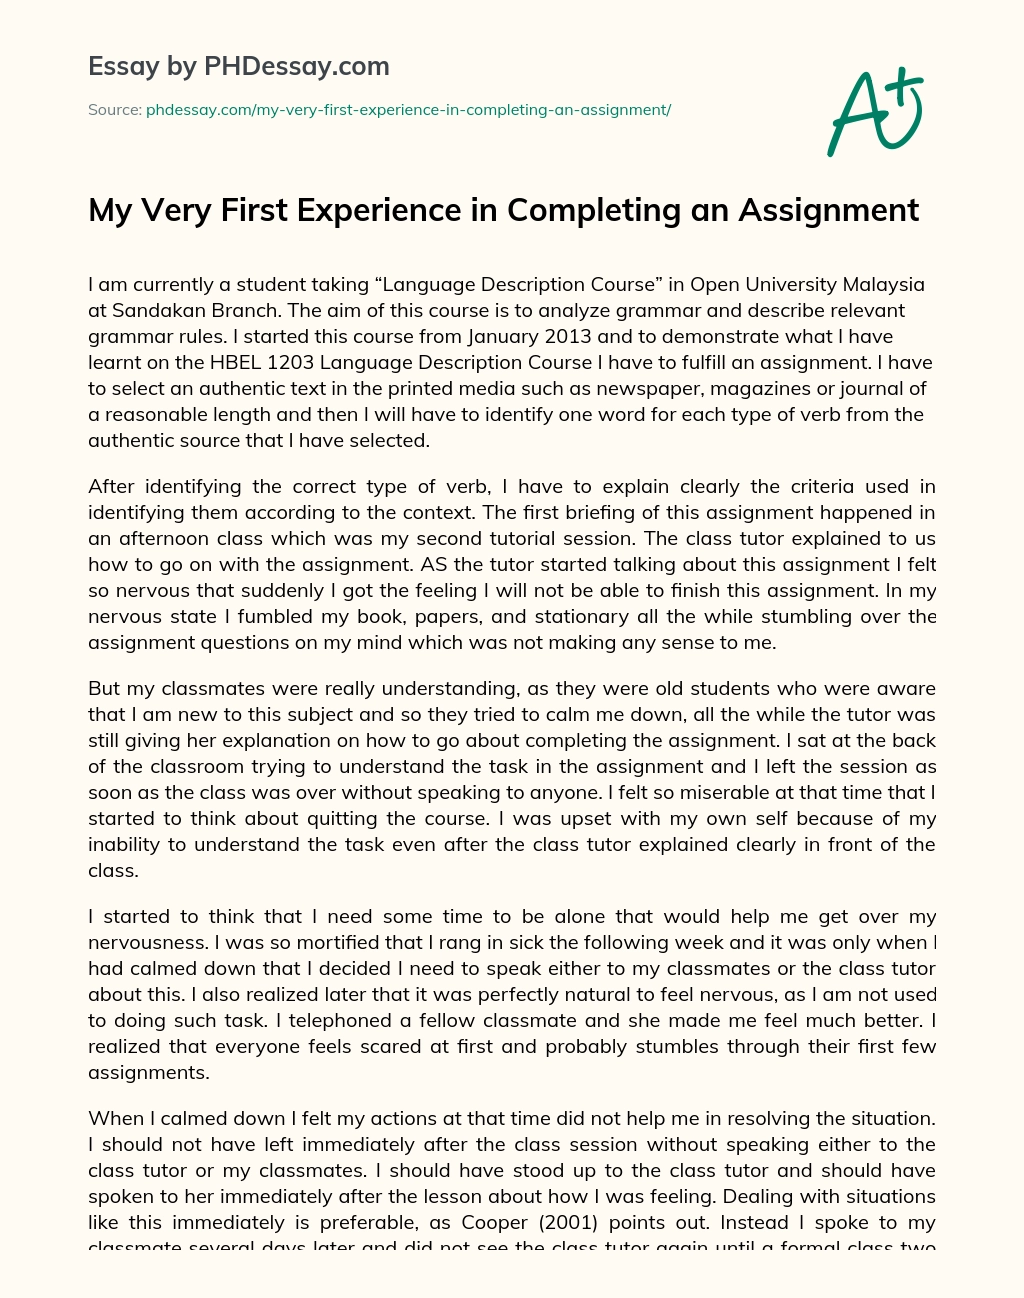 My Very First Experience in Completing an Assignment essay